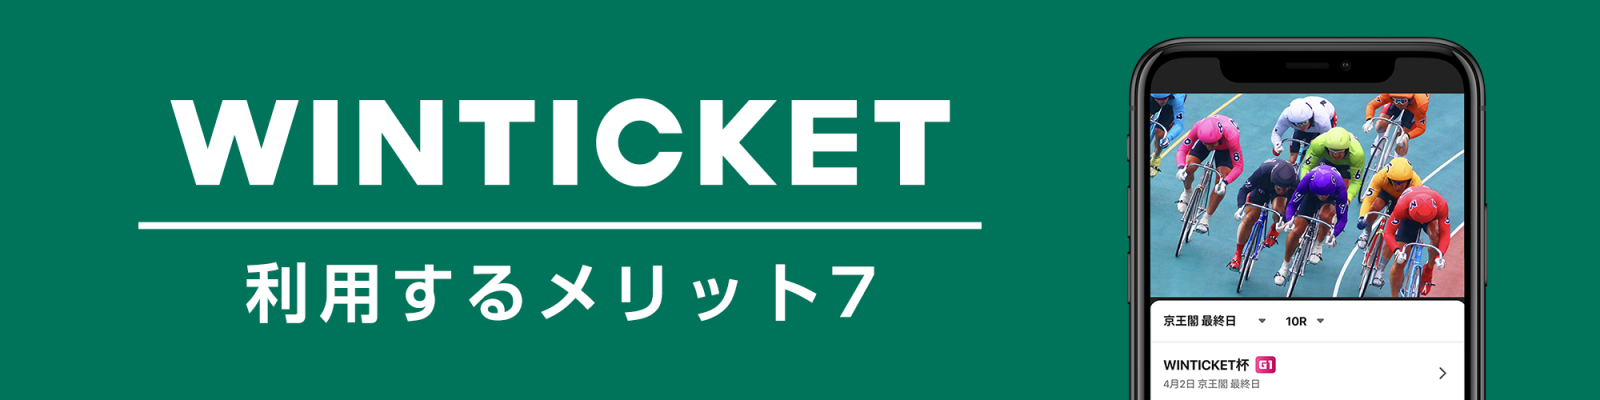 WINTICKETを利用するメリット紹介画像